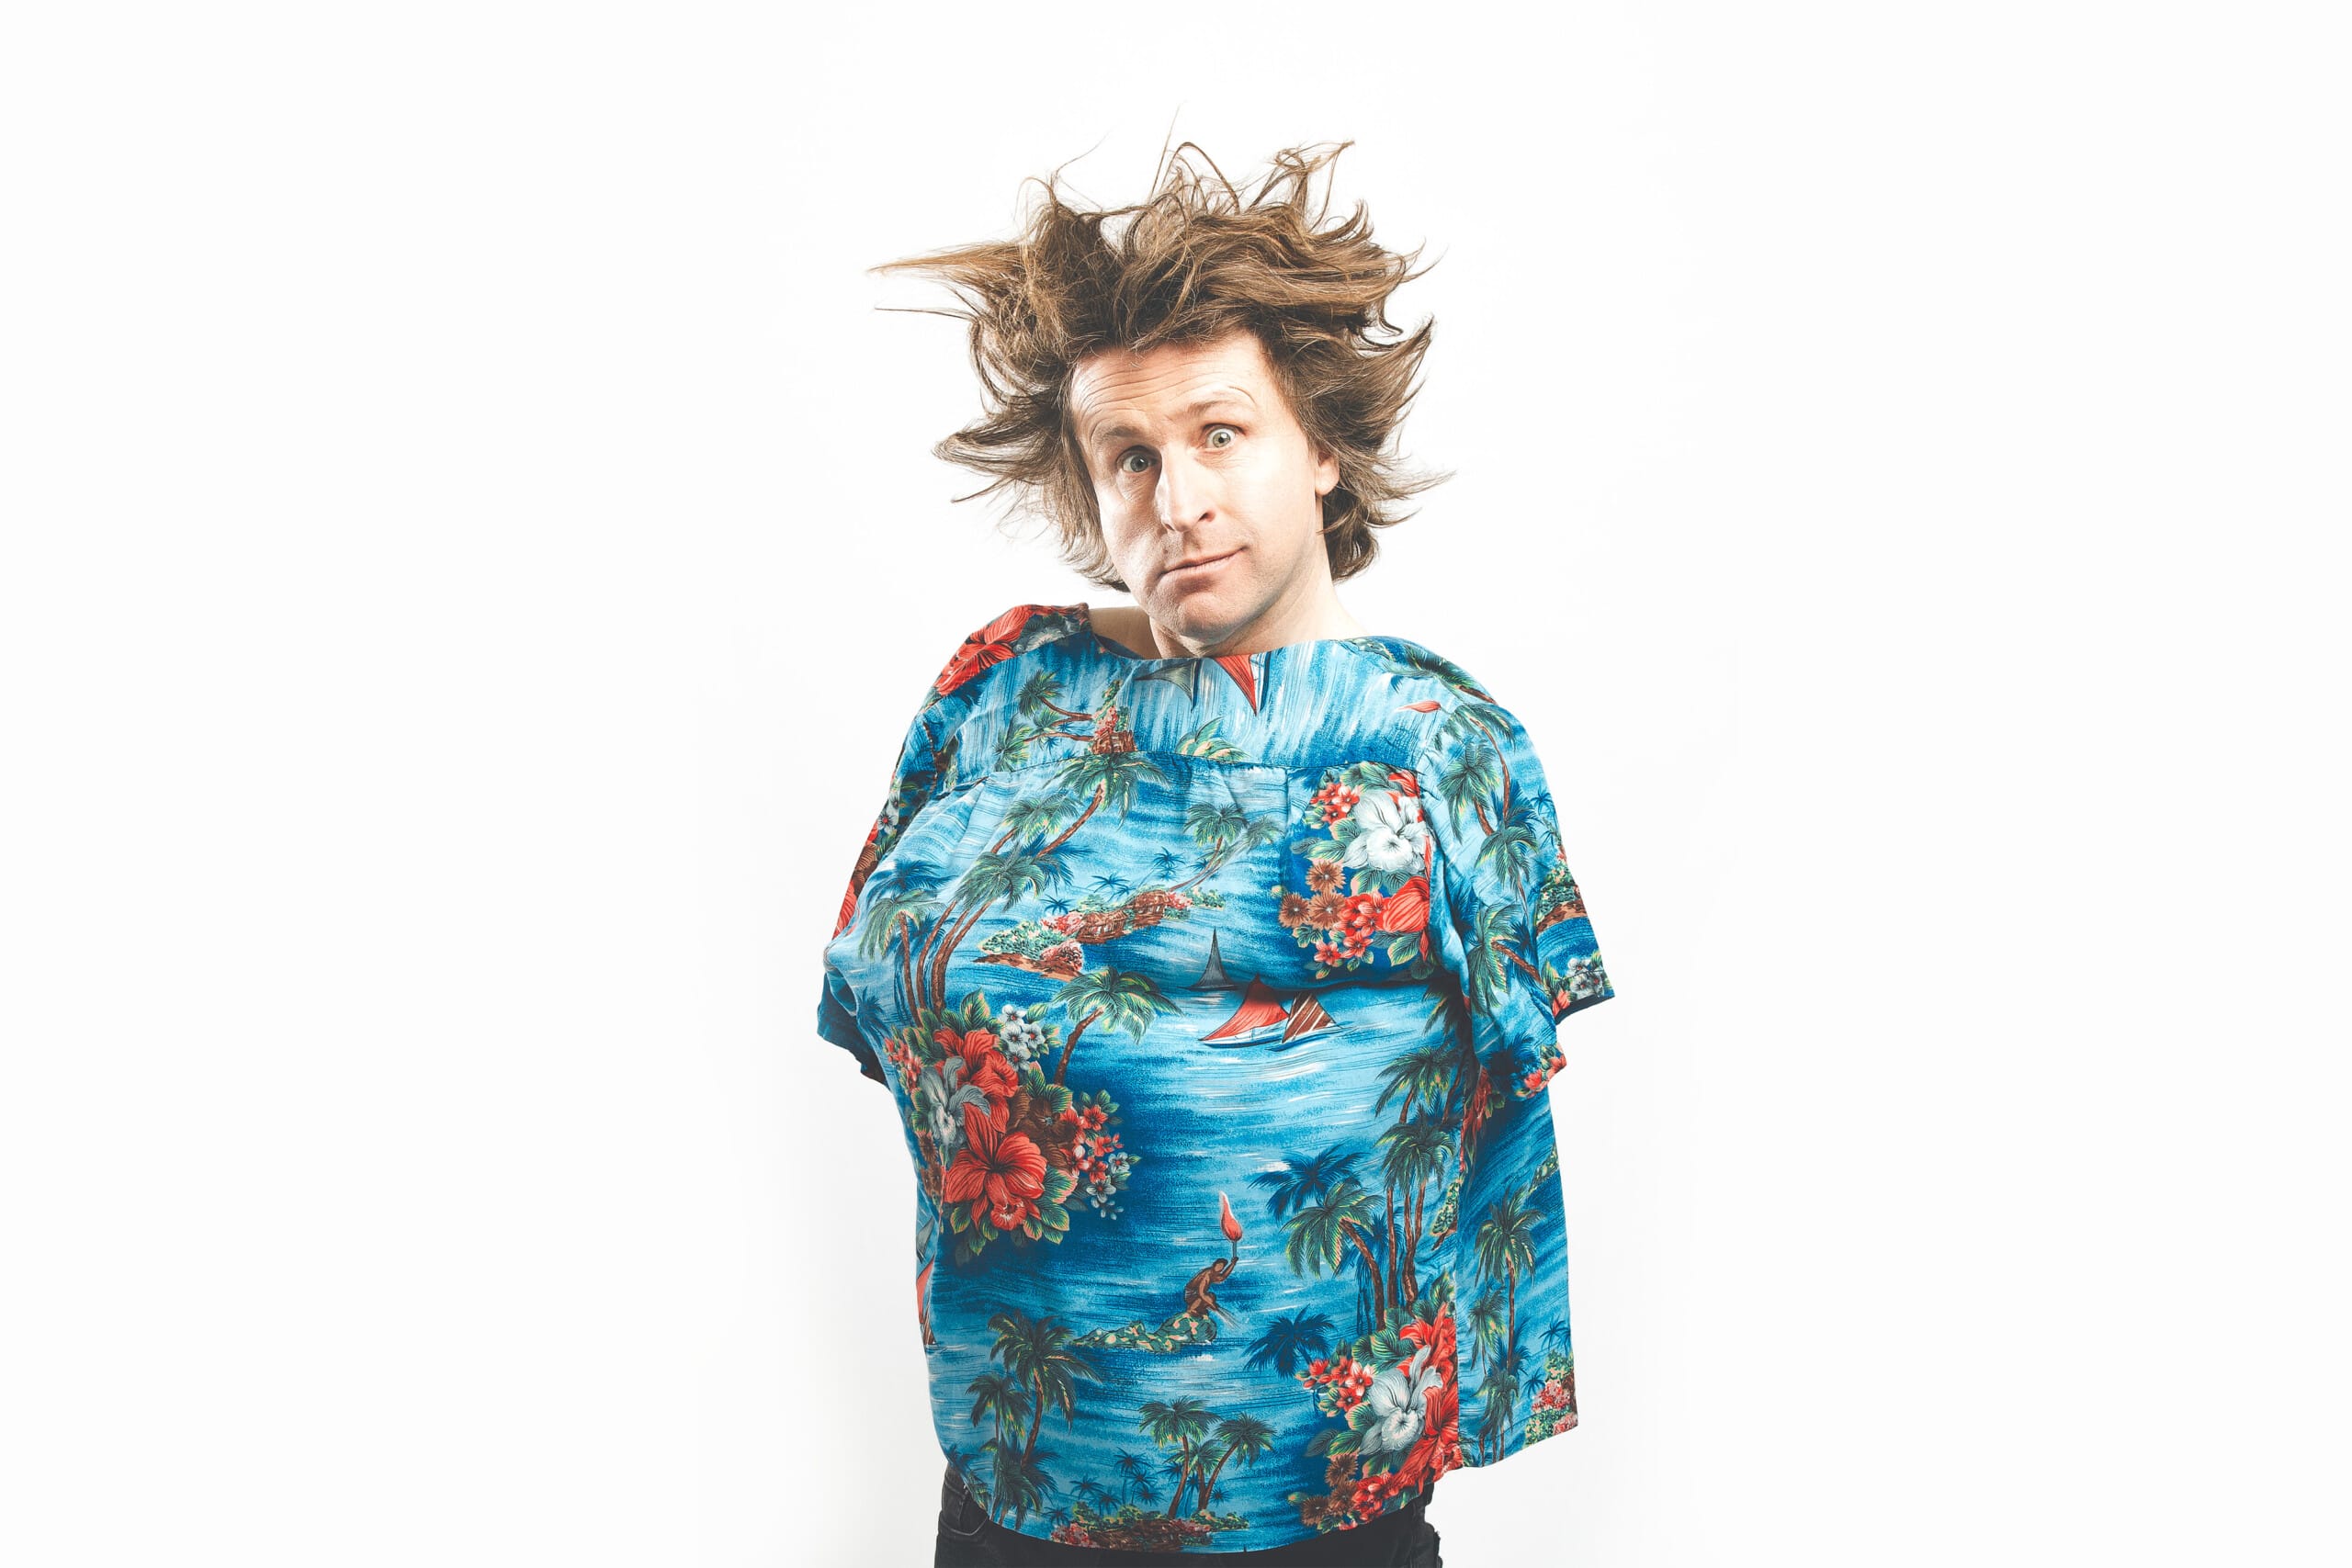 Comedian Milton Jones poses in a vibrant blue Hawaiian shirt, worn backwards. His hair is blown dramatically with a wind-machine, and he wears a bemused, comical expression.